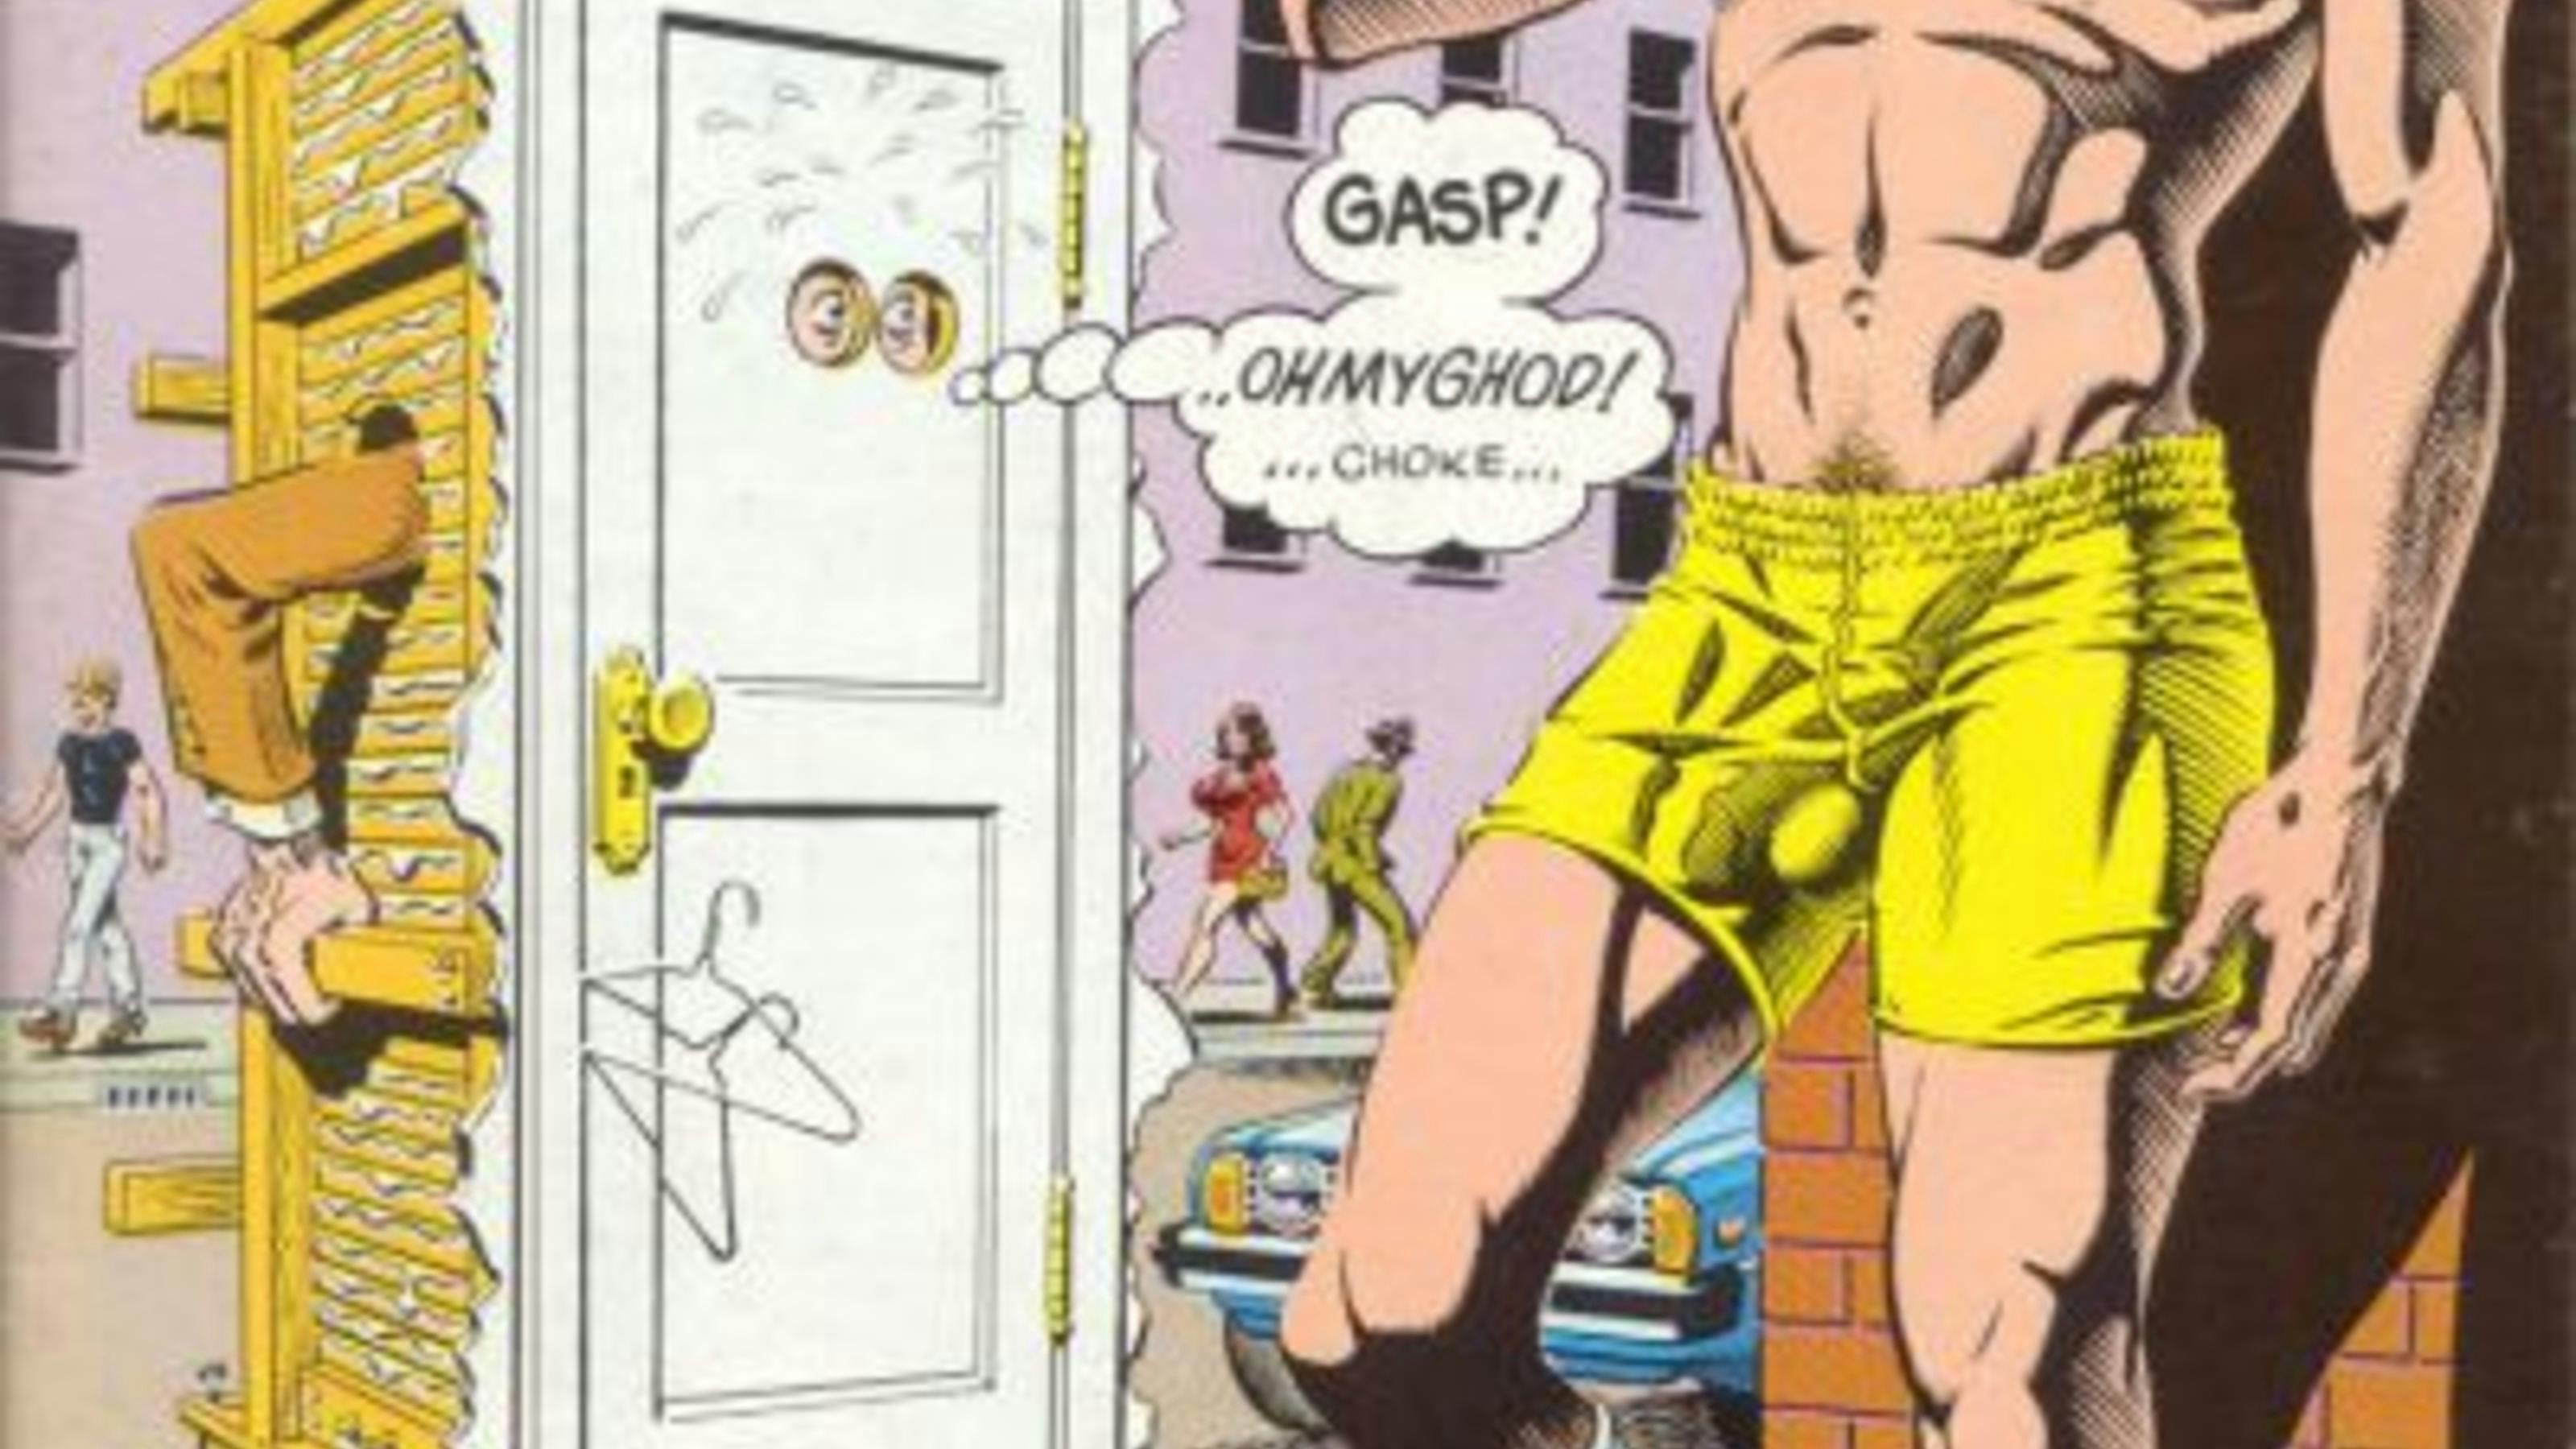 1980s Gay Porn Forced - Sex in graphic novels | Wellcome Collection